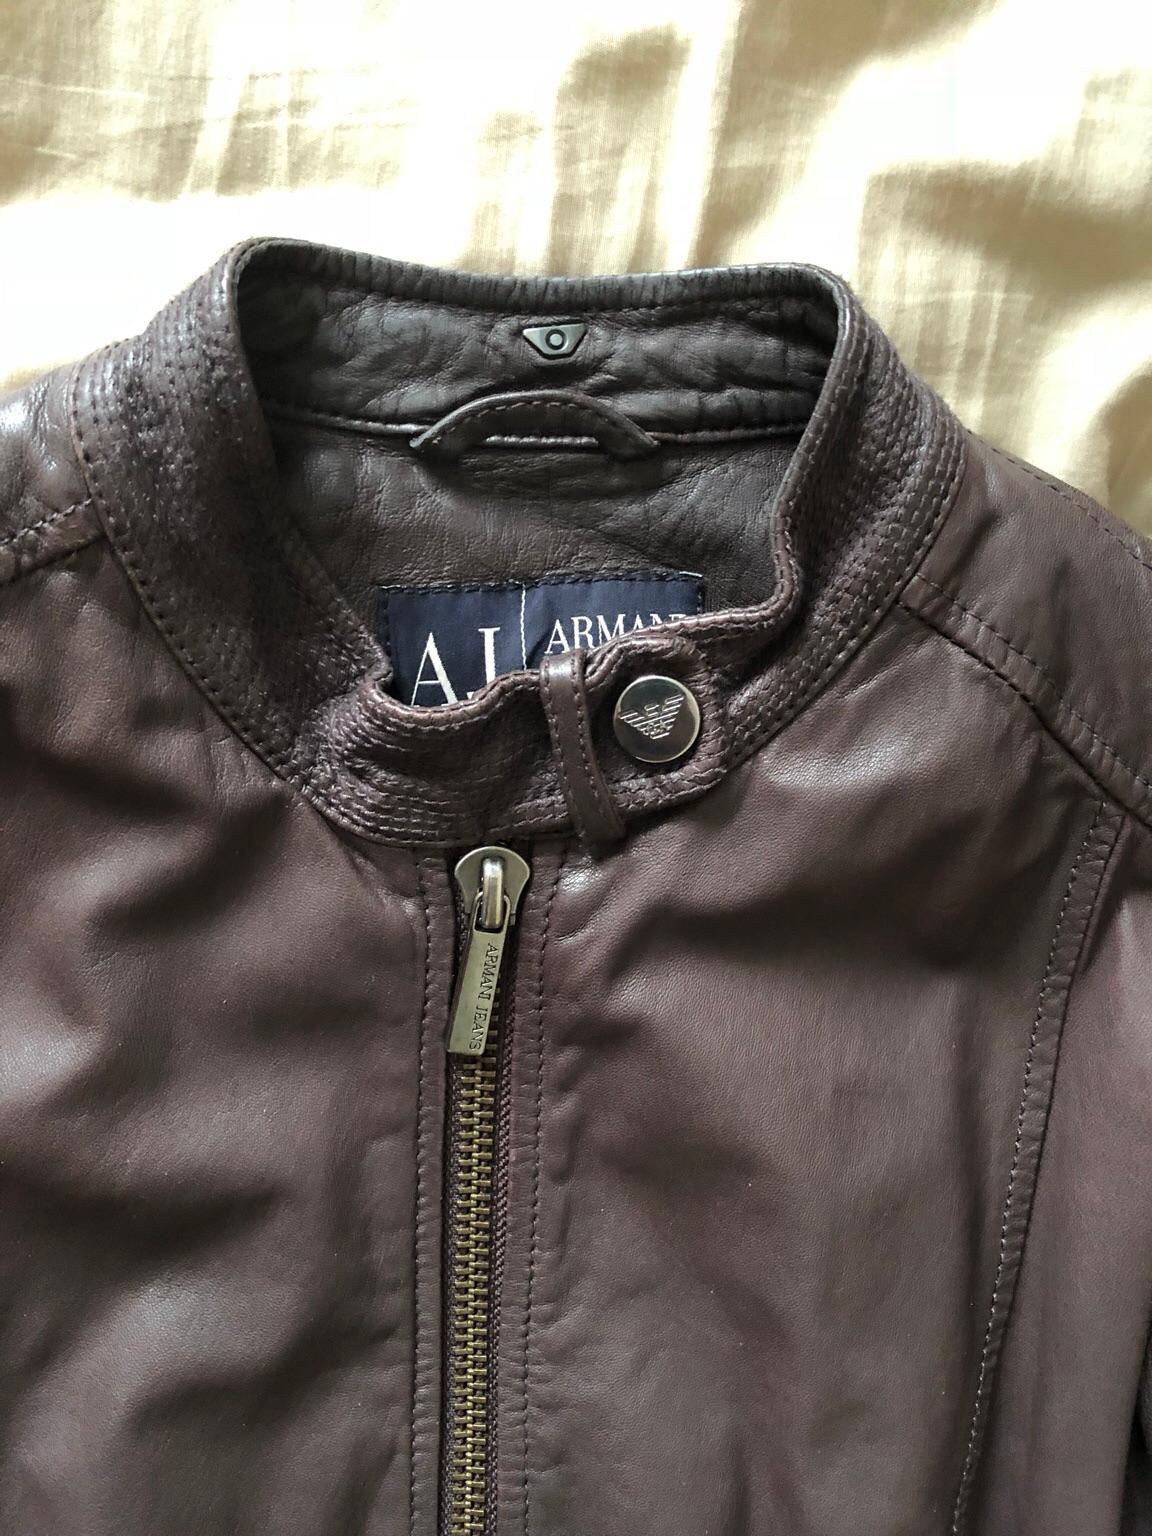 Armani Jeans Leather Jacket in London 